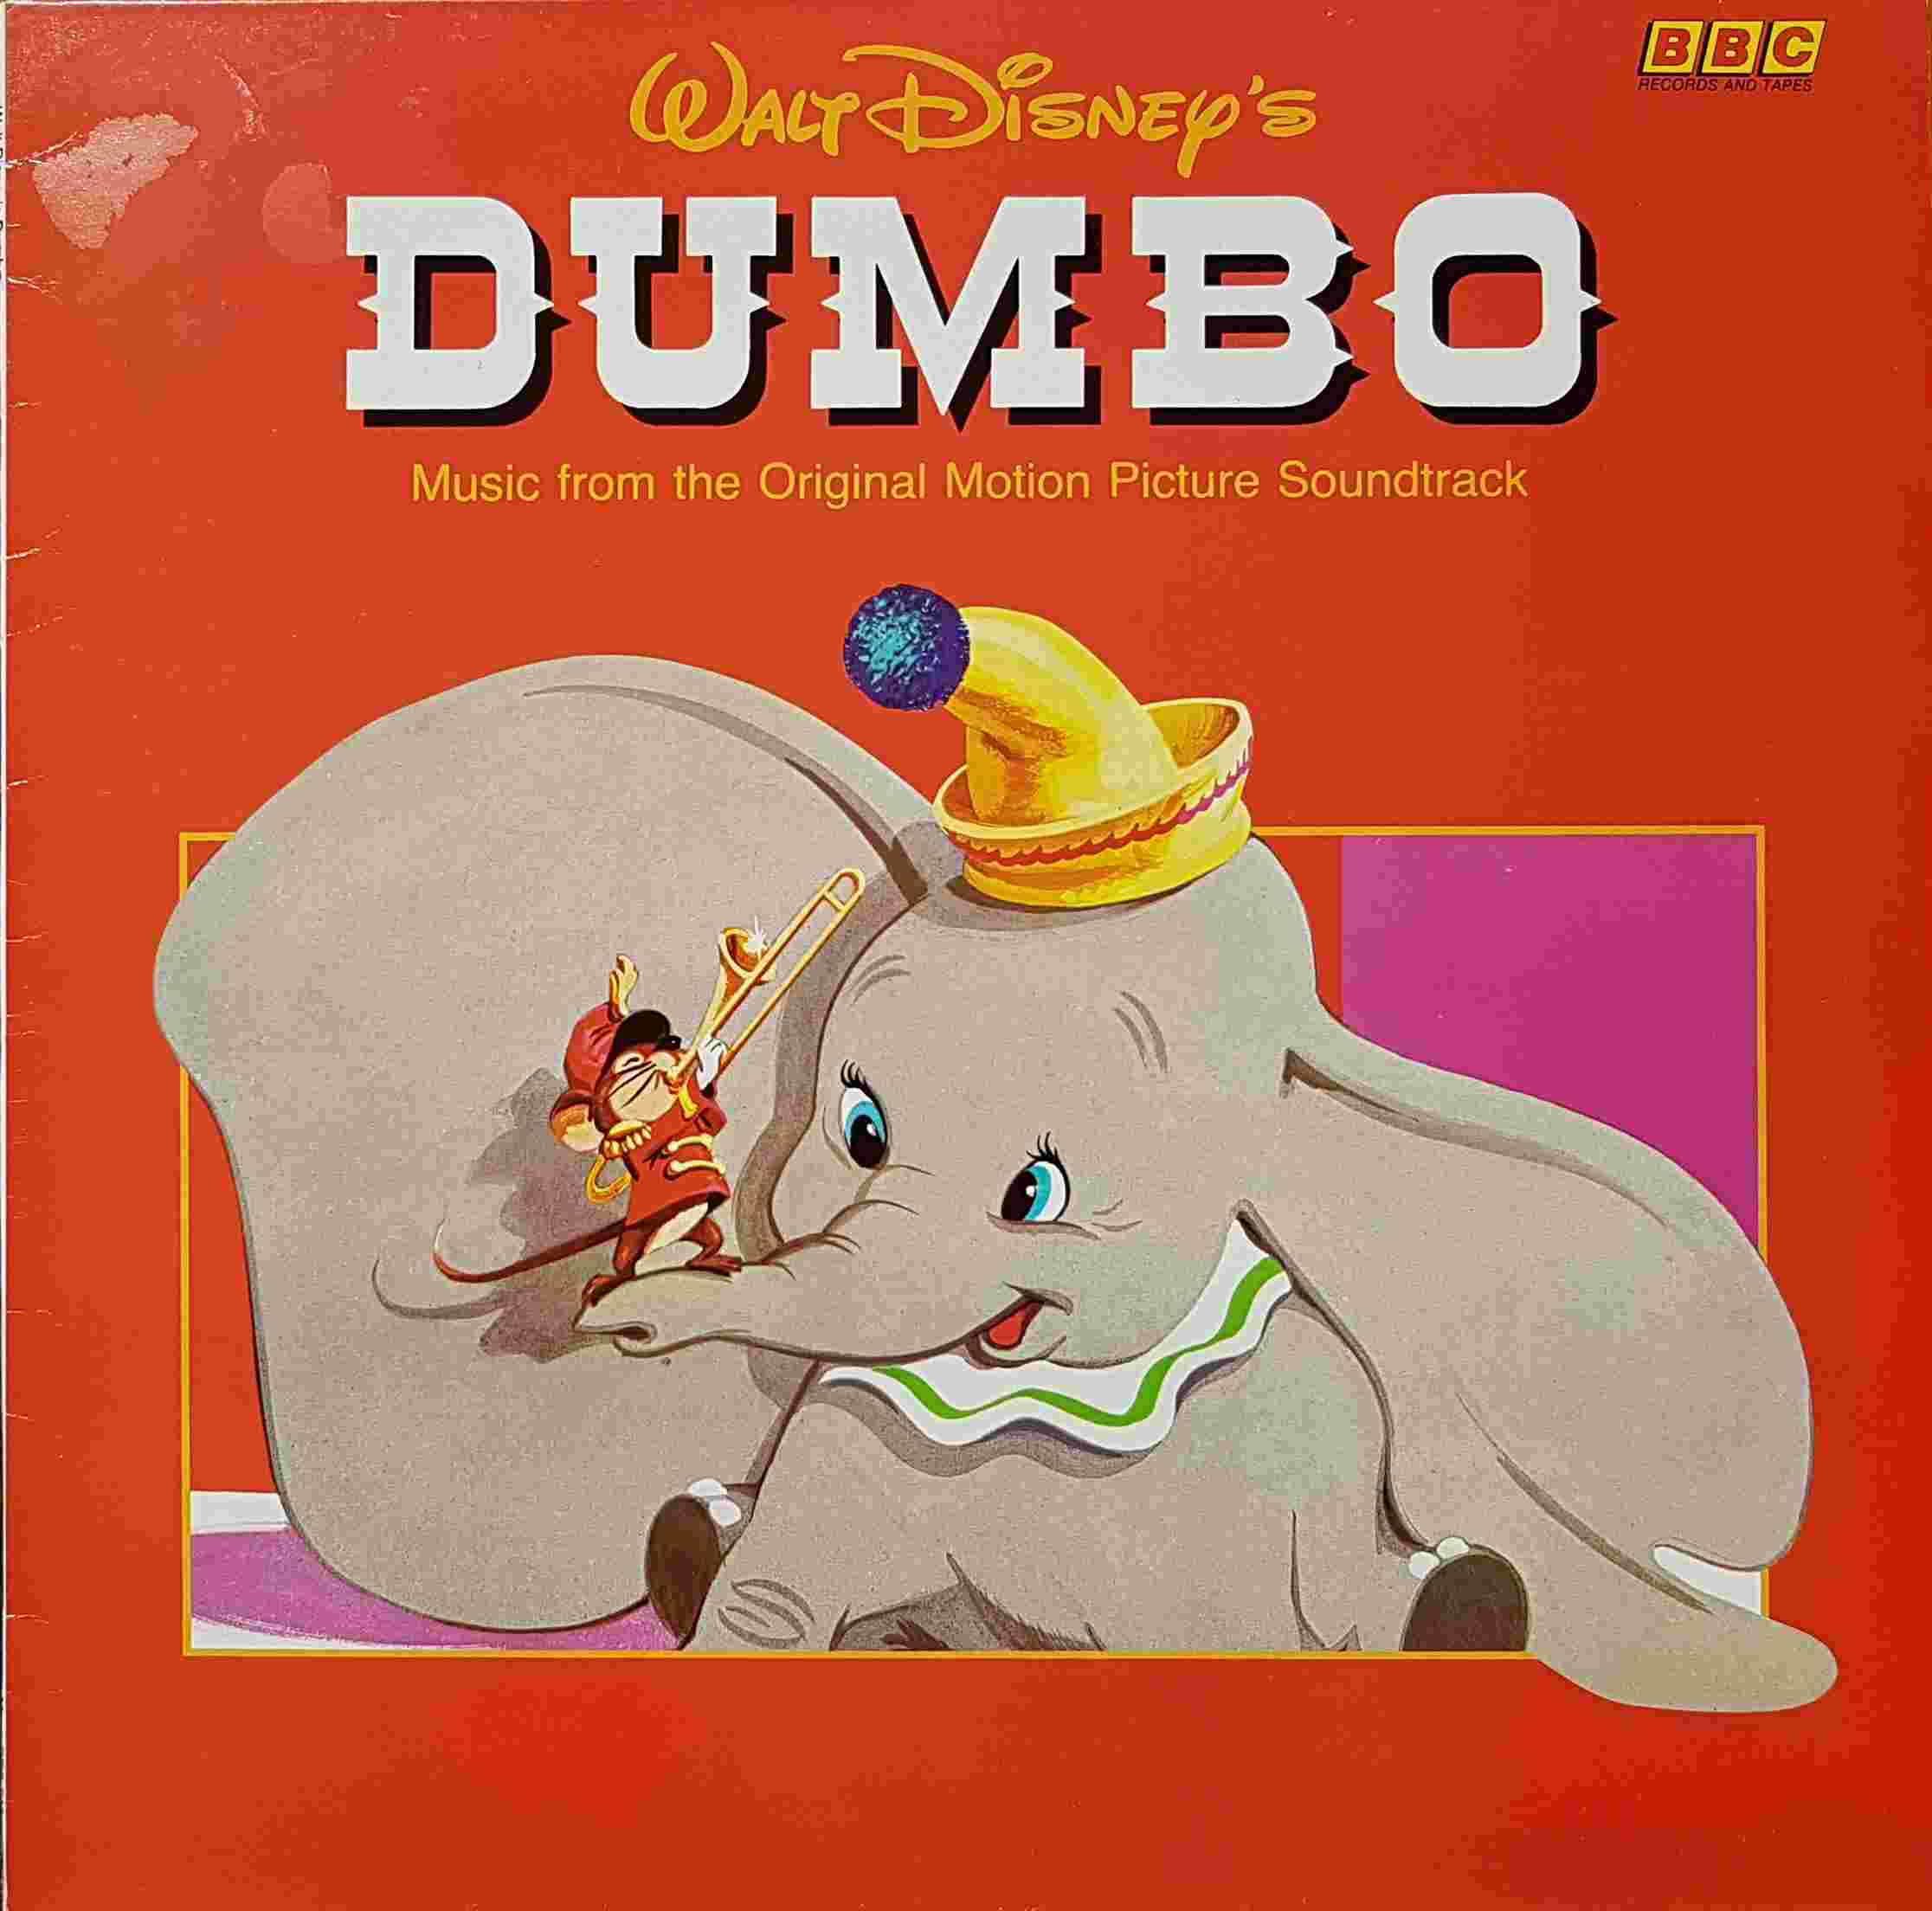 Picture of REC 542 Dumbo by artist Washington / Churchill from the BBC albums - Records and Tapes library